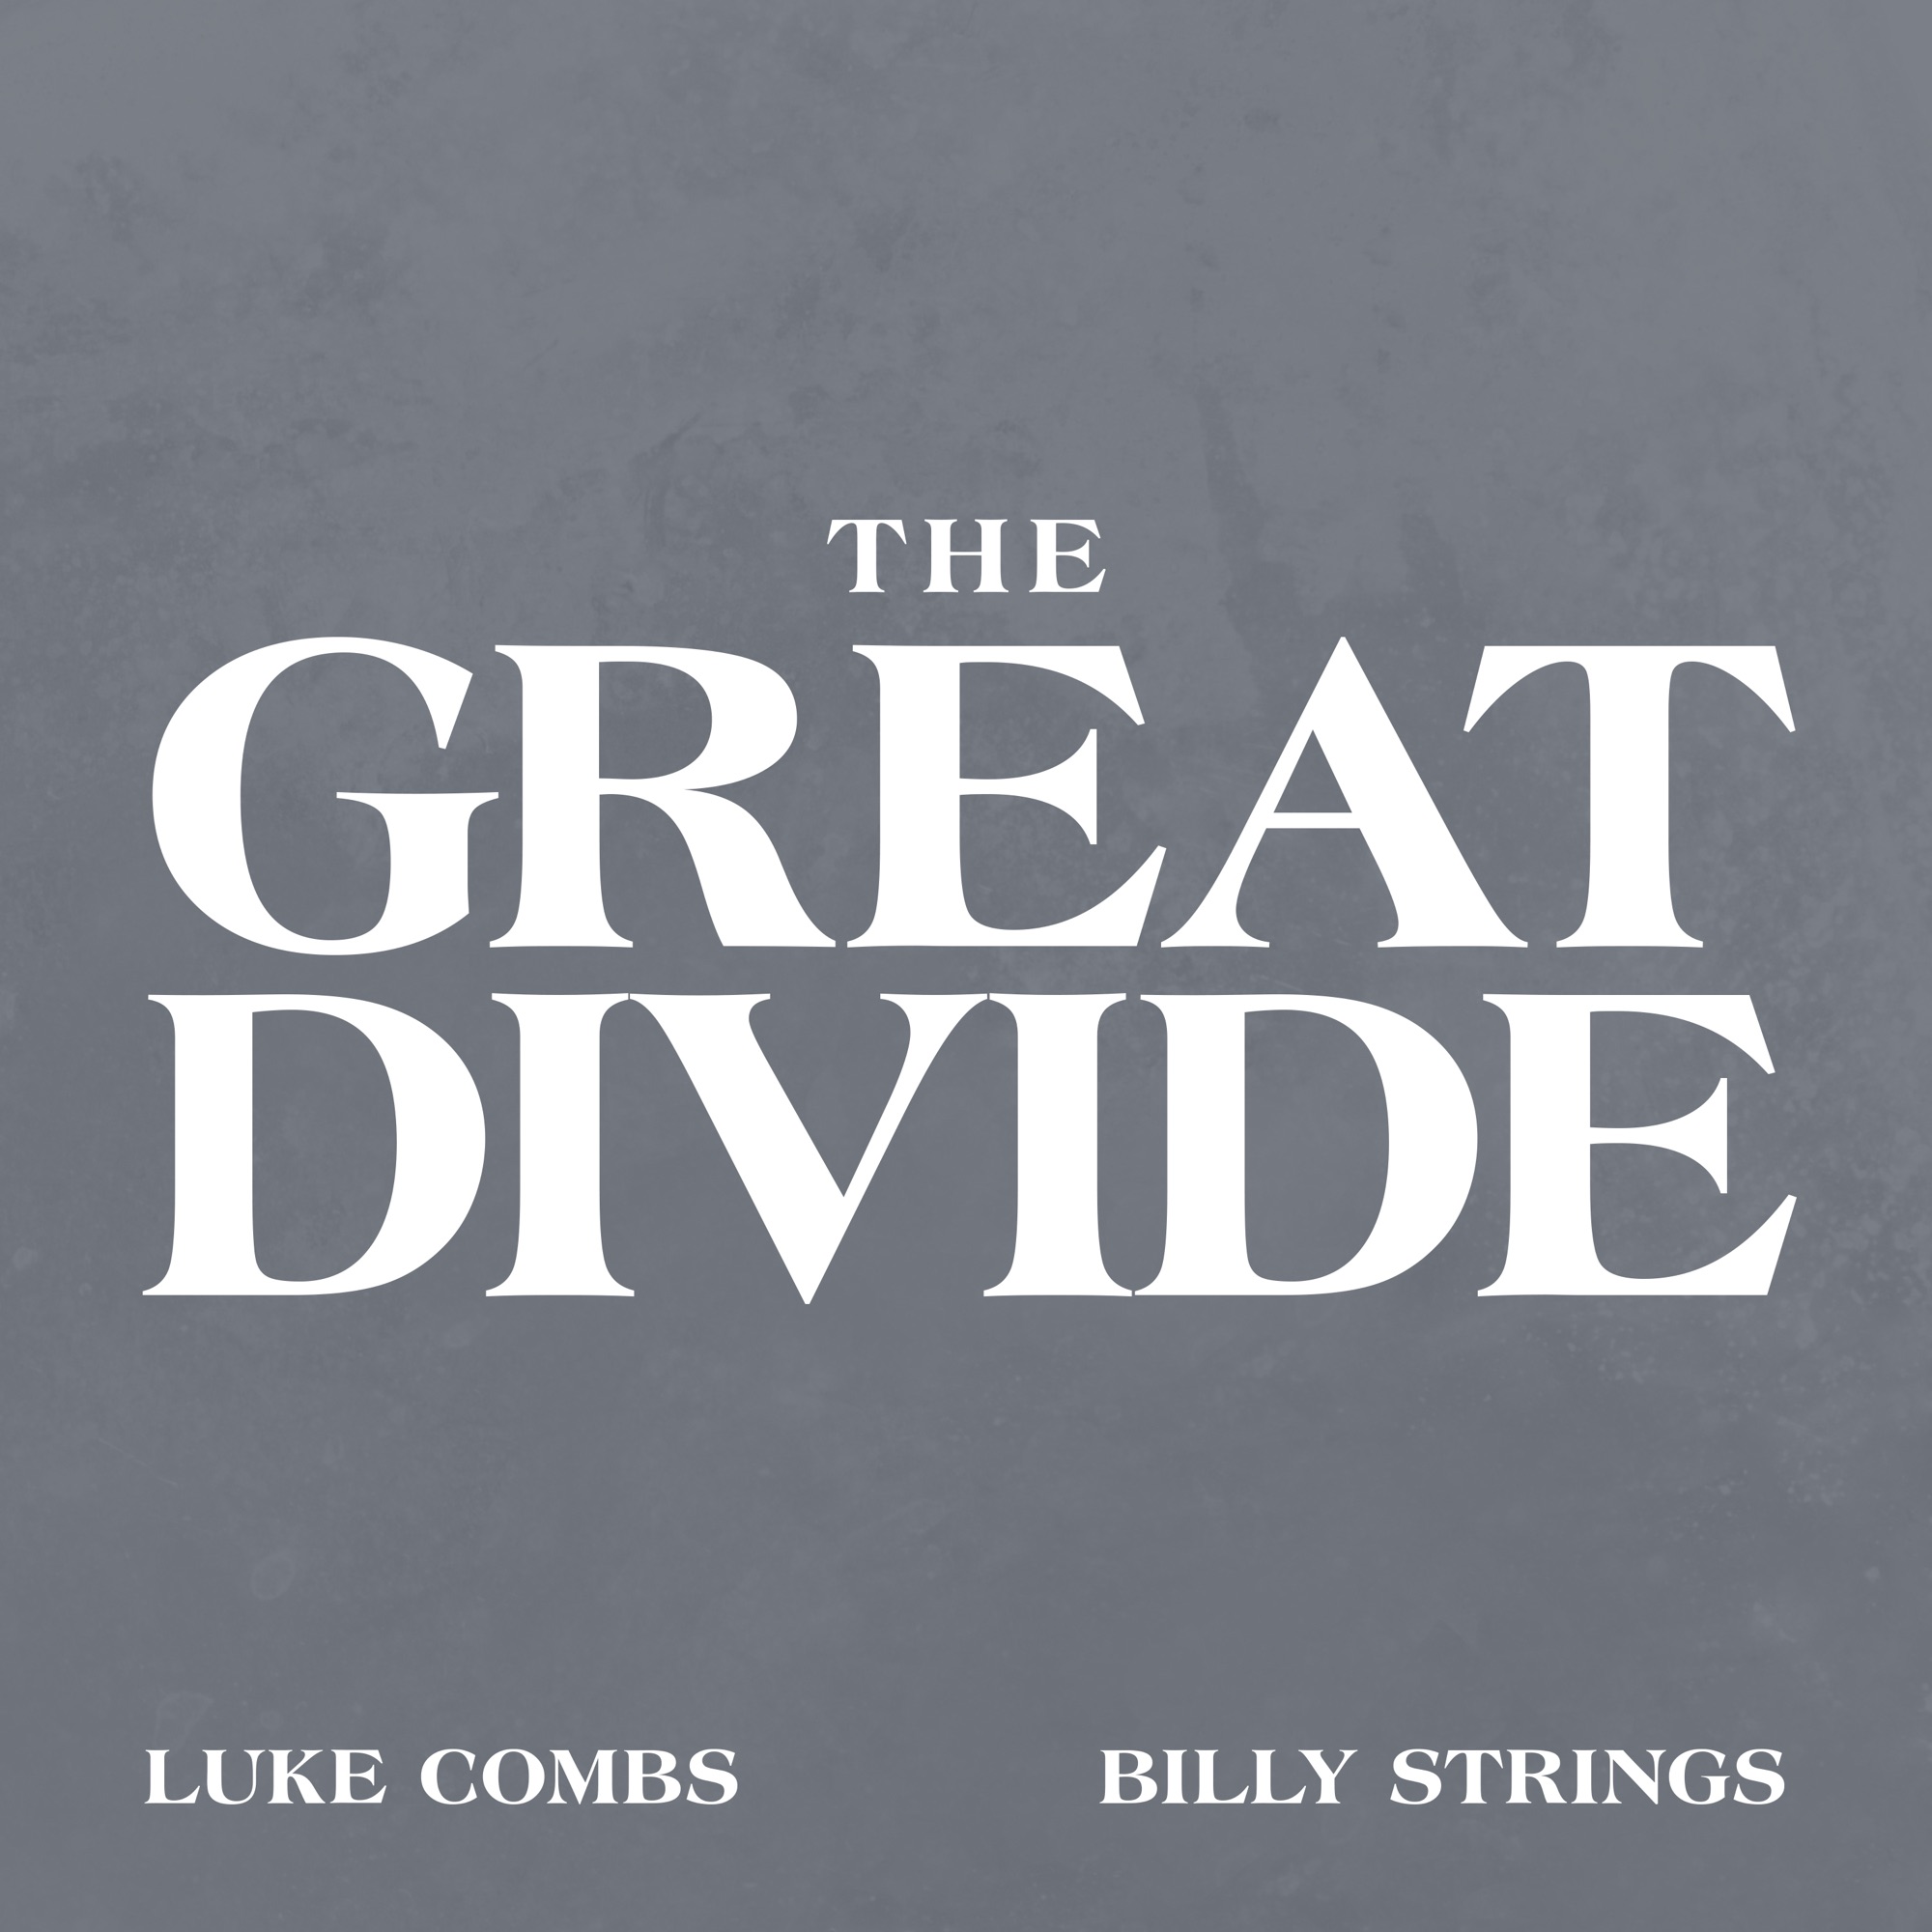 Luke Combs & Billy Strings - The Great Divide - Single